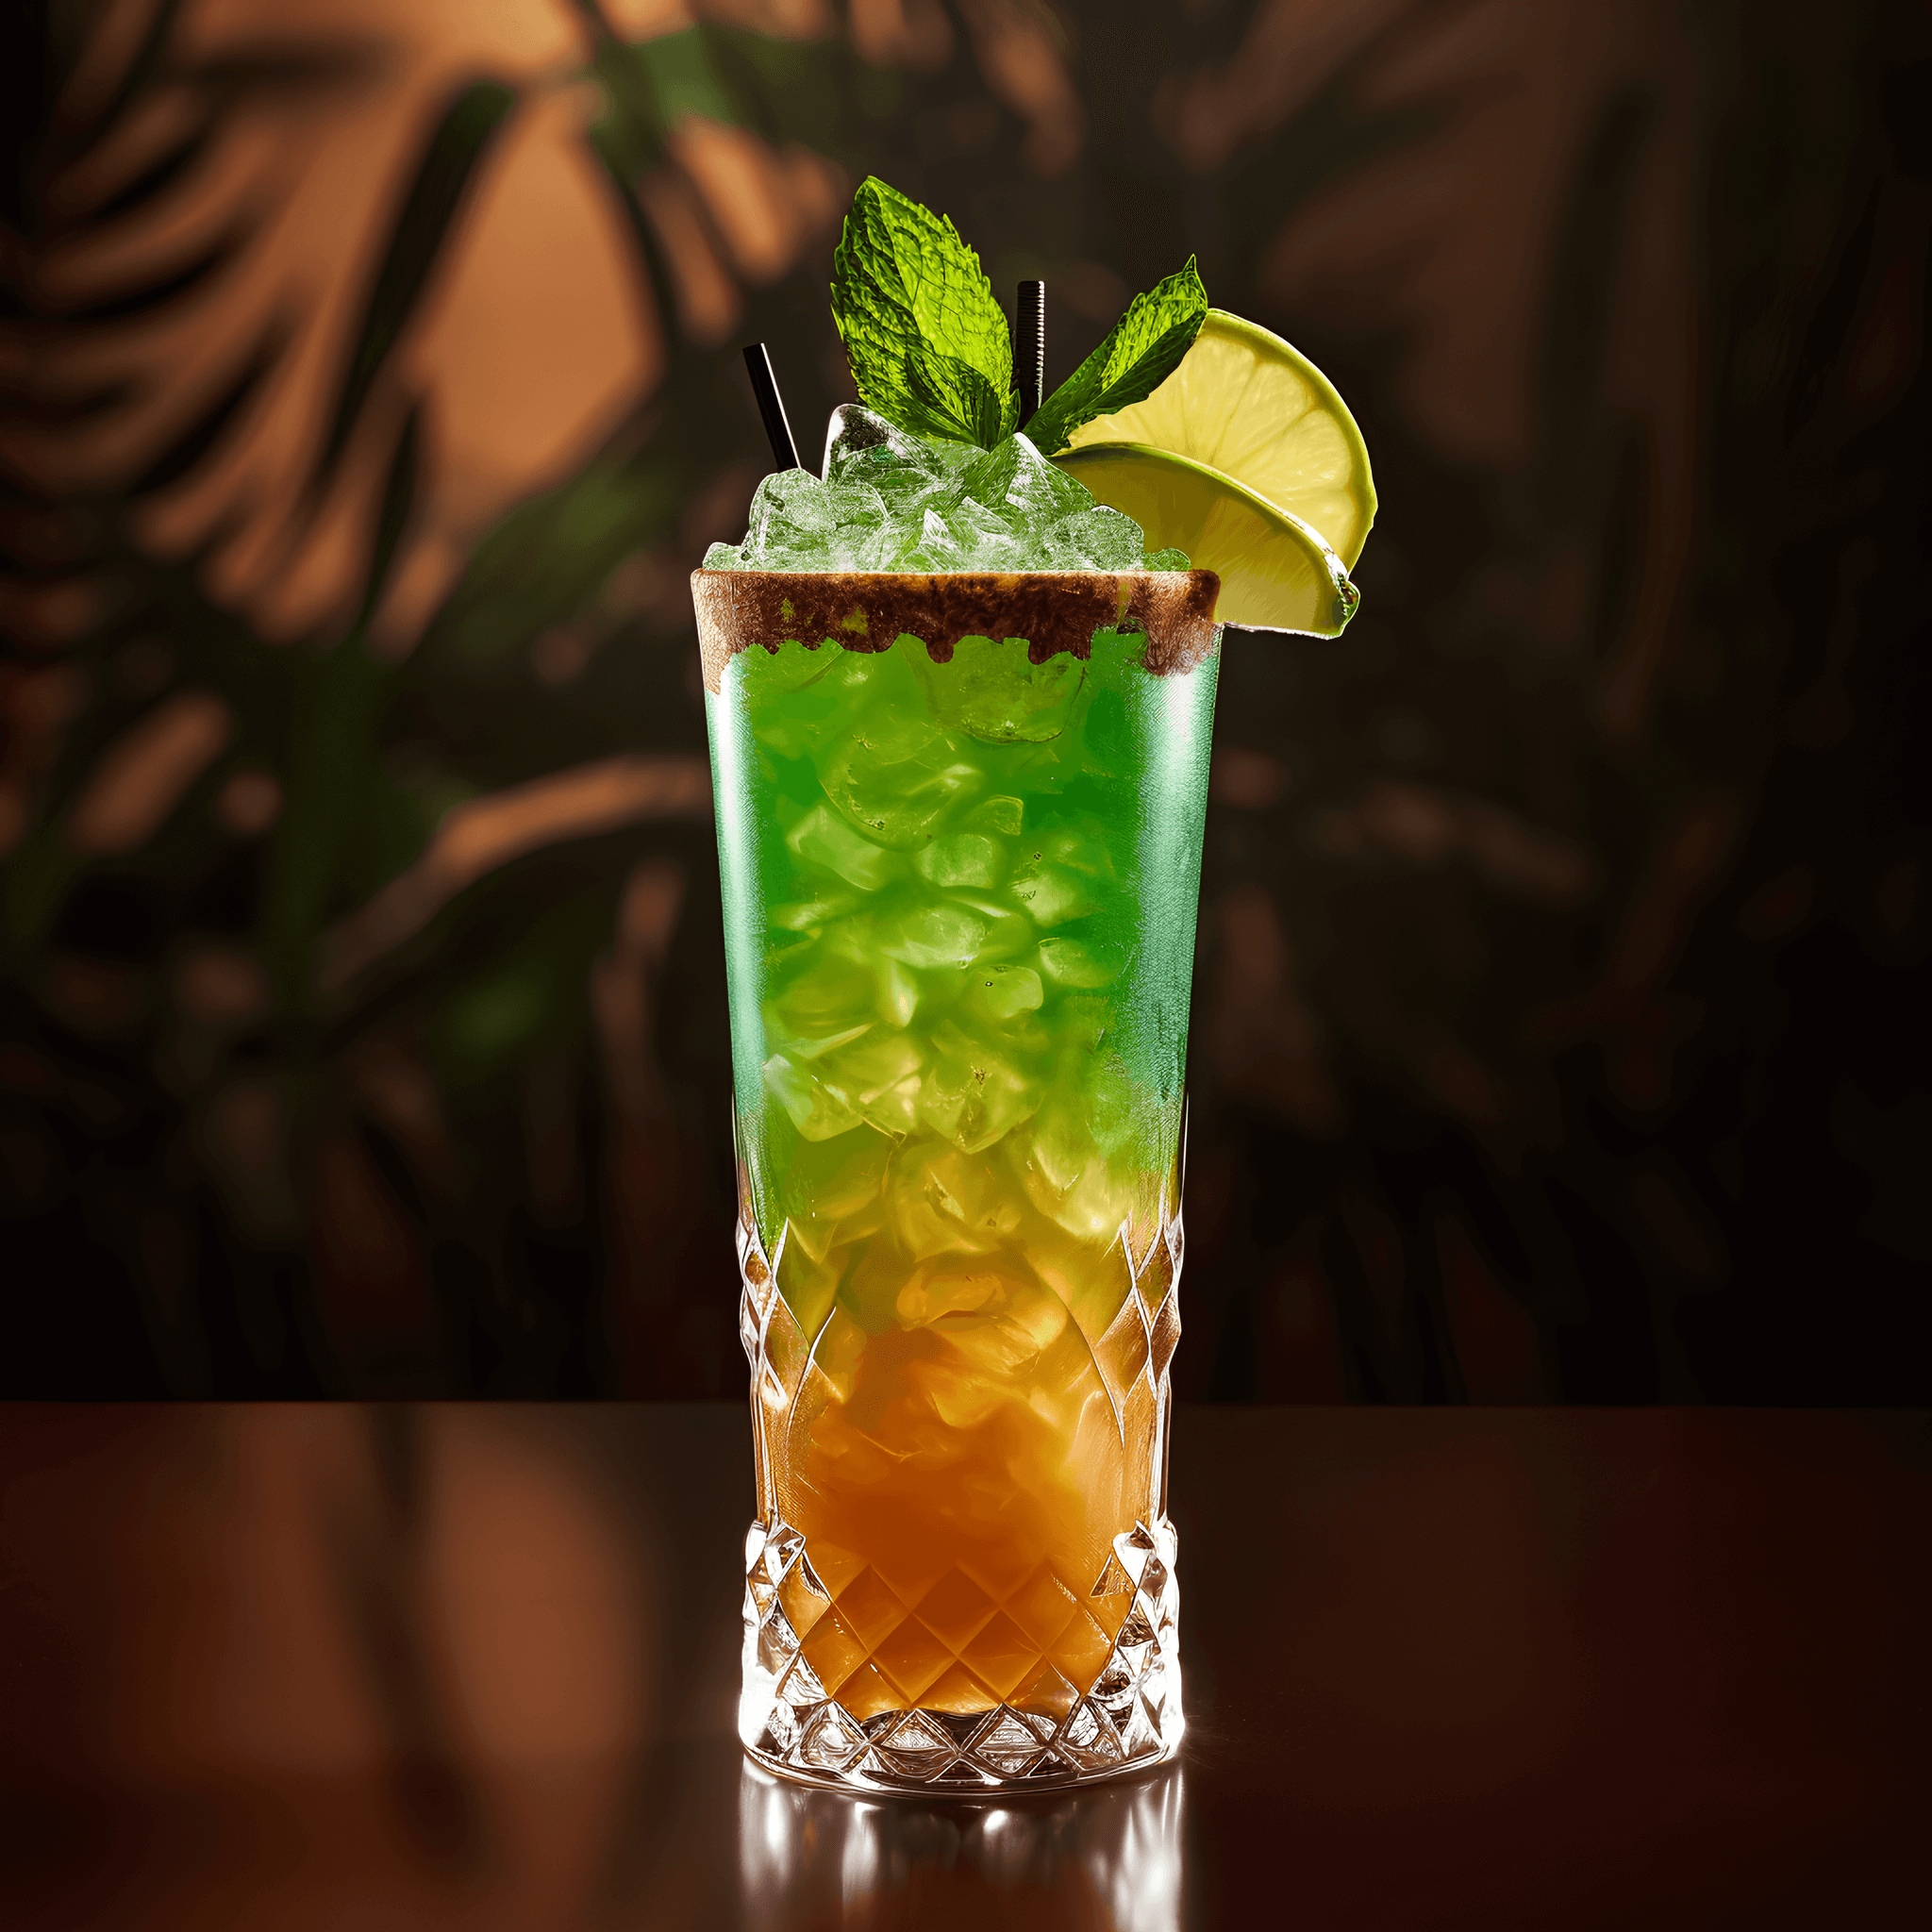 The Mai Tai has a balanced, sweet, and tangy taste with a hint of almond from the orgeat syrup. The combination of light and dark rums gives it a rich and complex flavor, while the lime juice adds a refreshing citrus note.